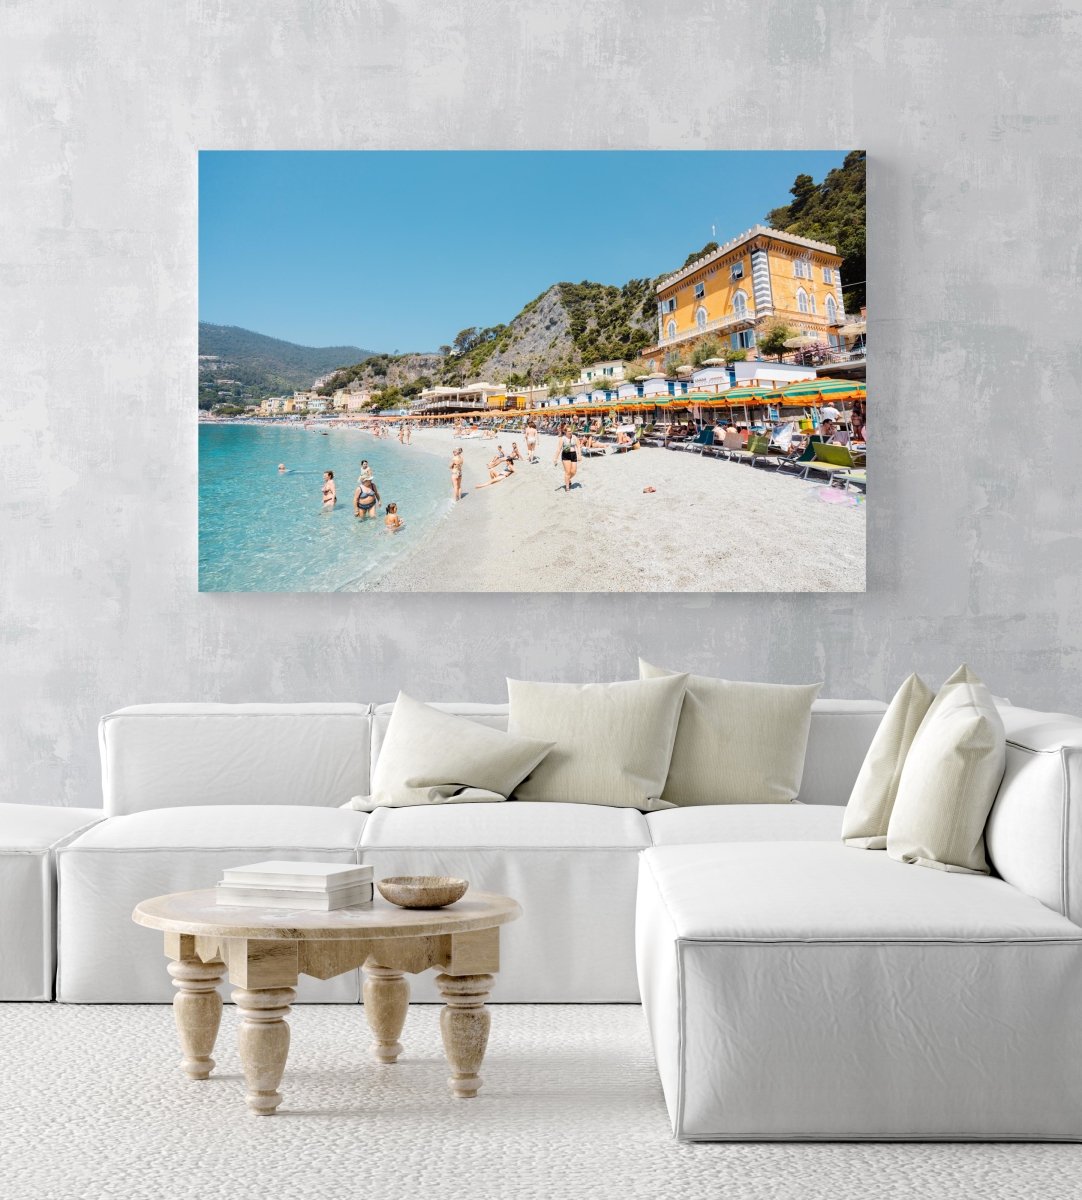 People swimming and sitting at colorful Monterosso beach in Italy in an acrylic/perspex frame